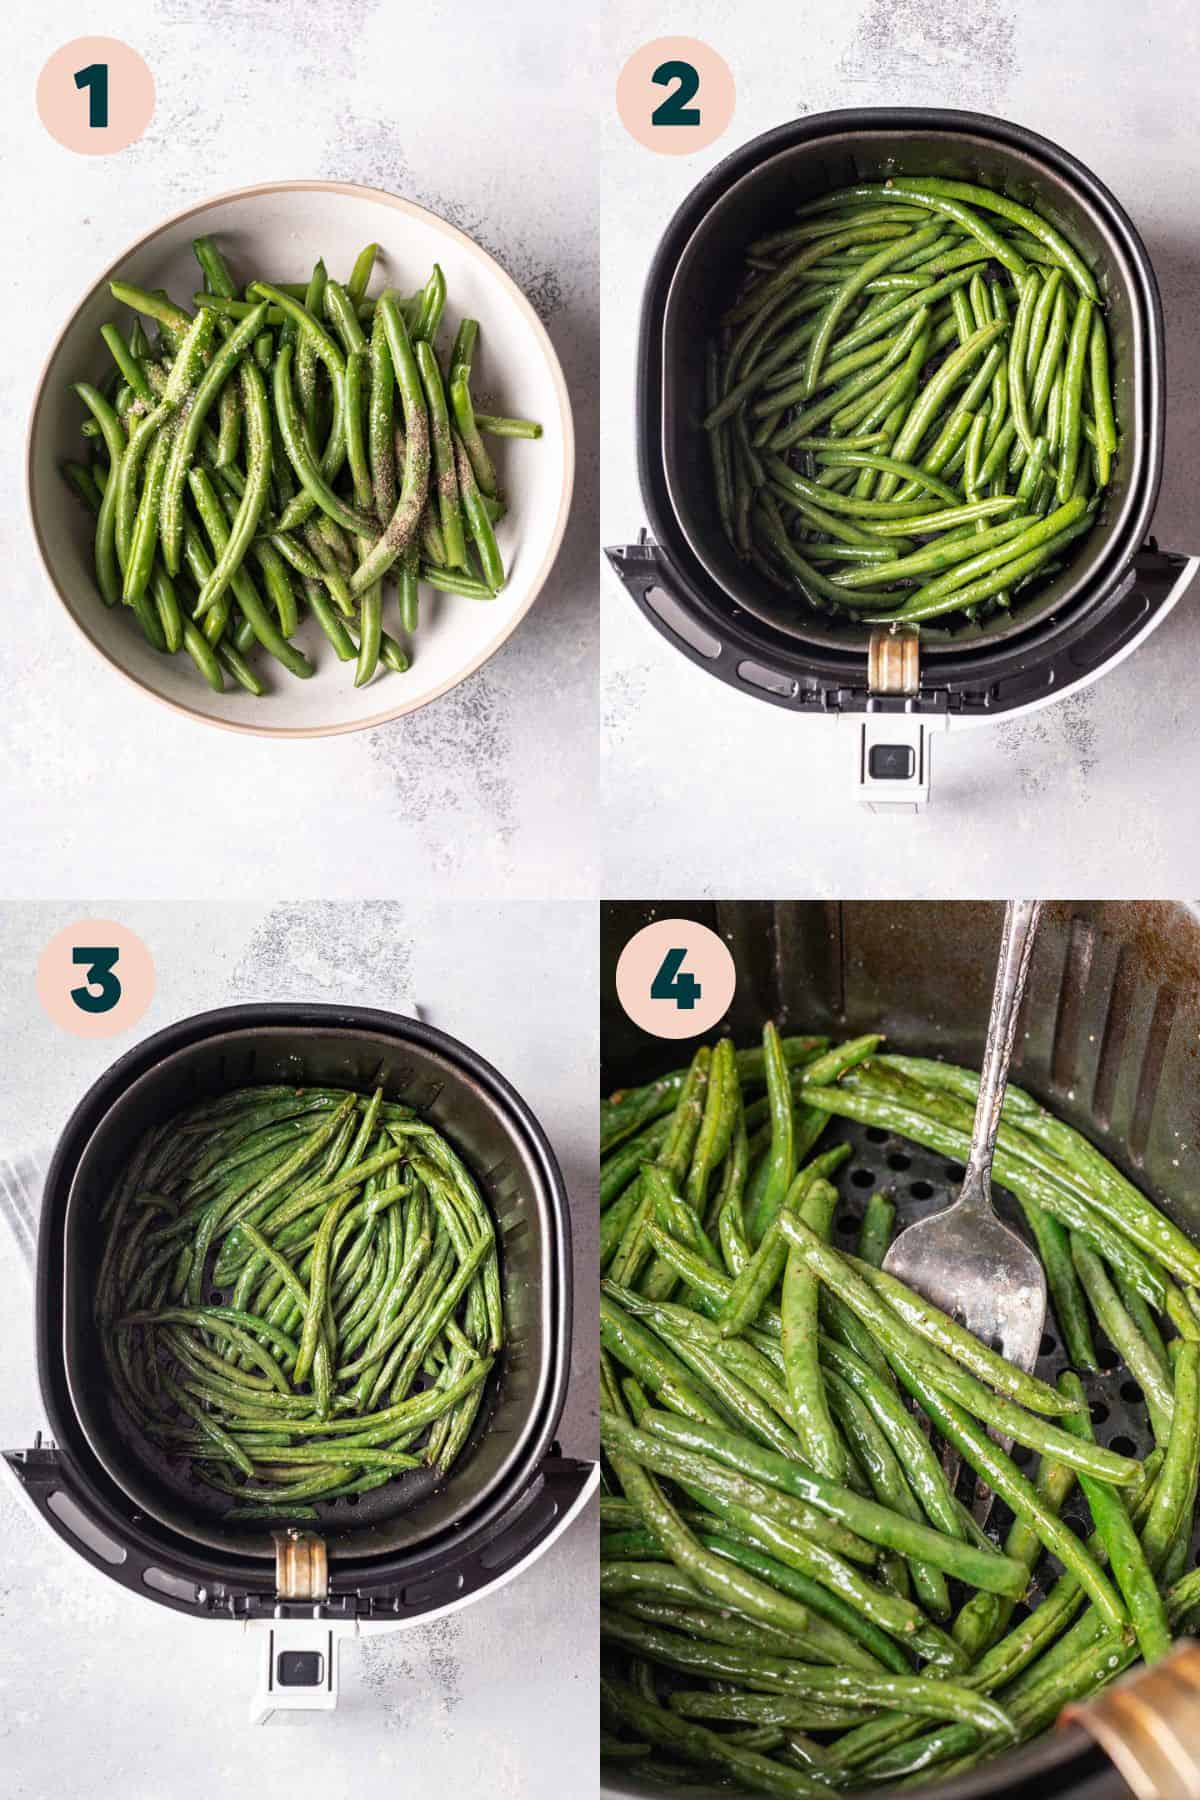 4 images showing step by step process for making green beans.